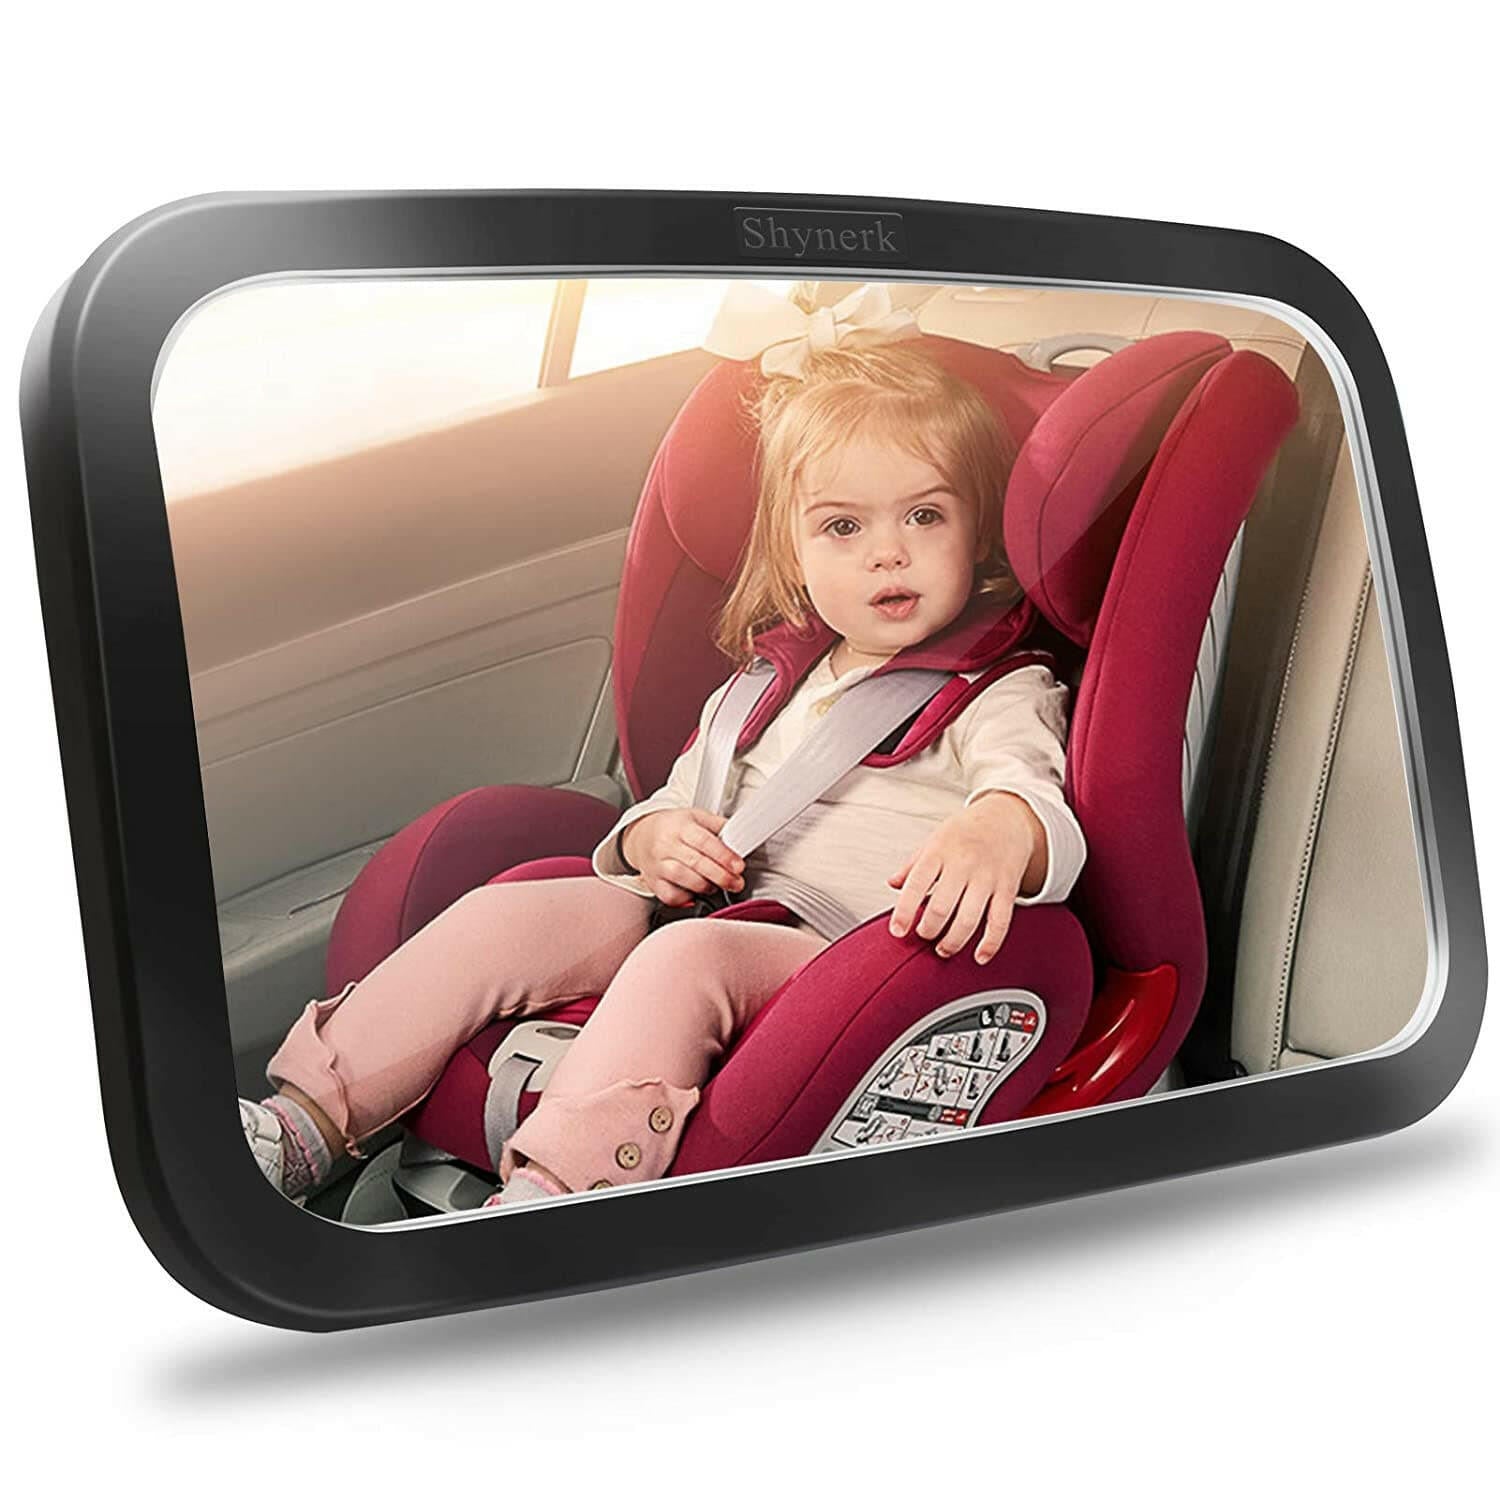 Baby Car Mirror, Safety Car Seat Mirror for Rear Facing Infant with Wide Crystal Clear View, Shatterproof, Fully Assembled, Crash Tested and Certified.